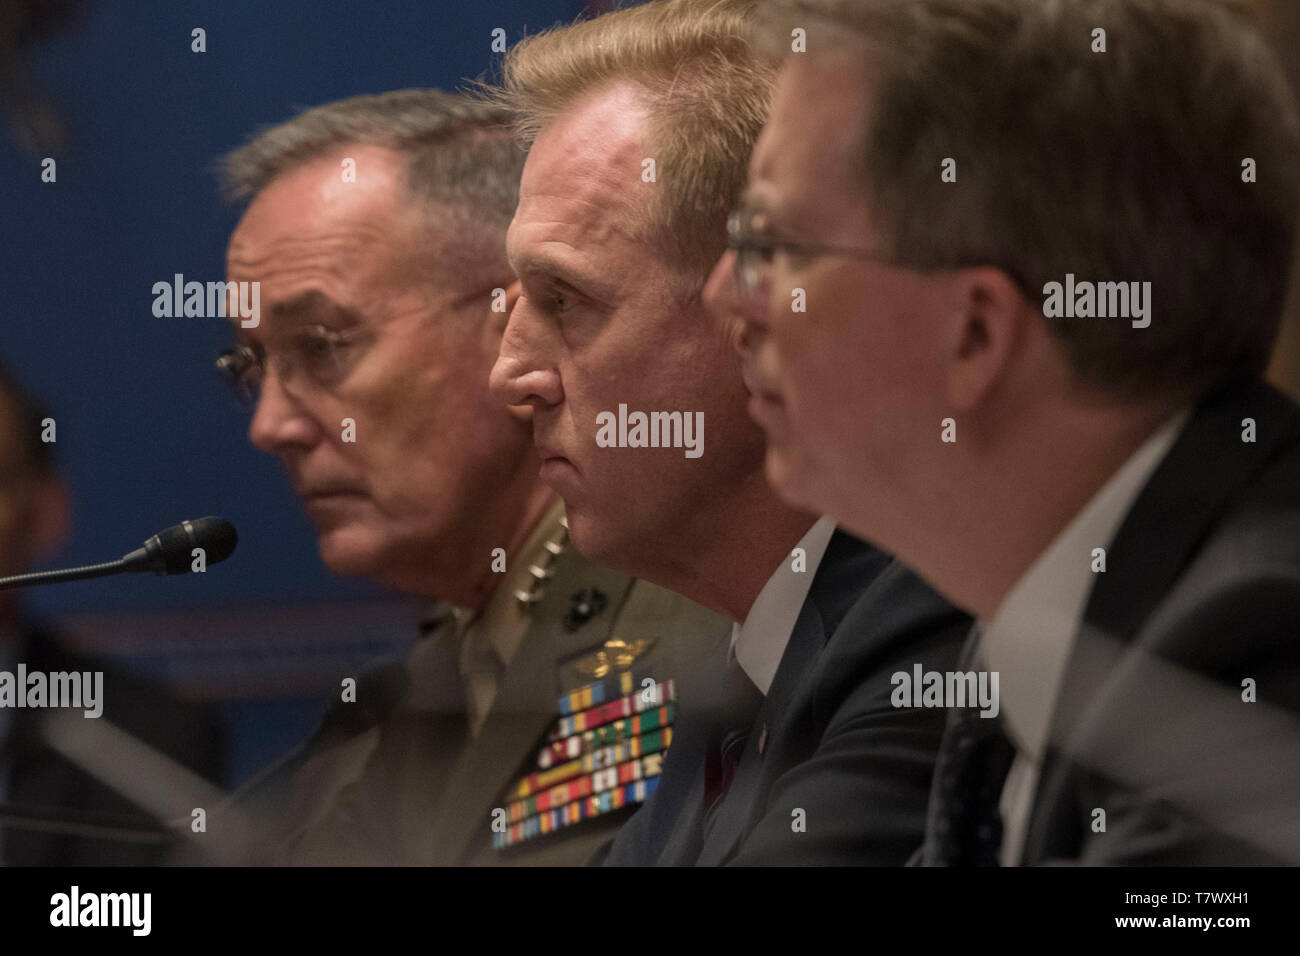 From left, the chairman of the Joint Chiefs of Staff, Marine Corps Gen. Joseph F. Dunford Jr., U.S. Acting Secretary of Defense Patrick M. Shanahan, and Under Secretary of Defense (Comptroller) / Chief Financial Officer David L. Norquist testify before the Senate Appropriations Defense Subcommittee on the fiscal year 2020 defense budget request, Washington, D.C., May 8, 2019. (DoD photo by Lisa Ferdinando) Stock Photo